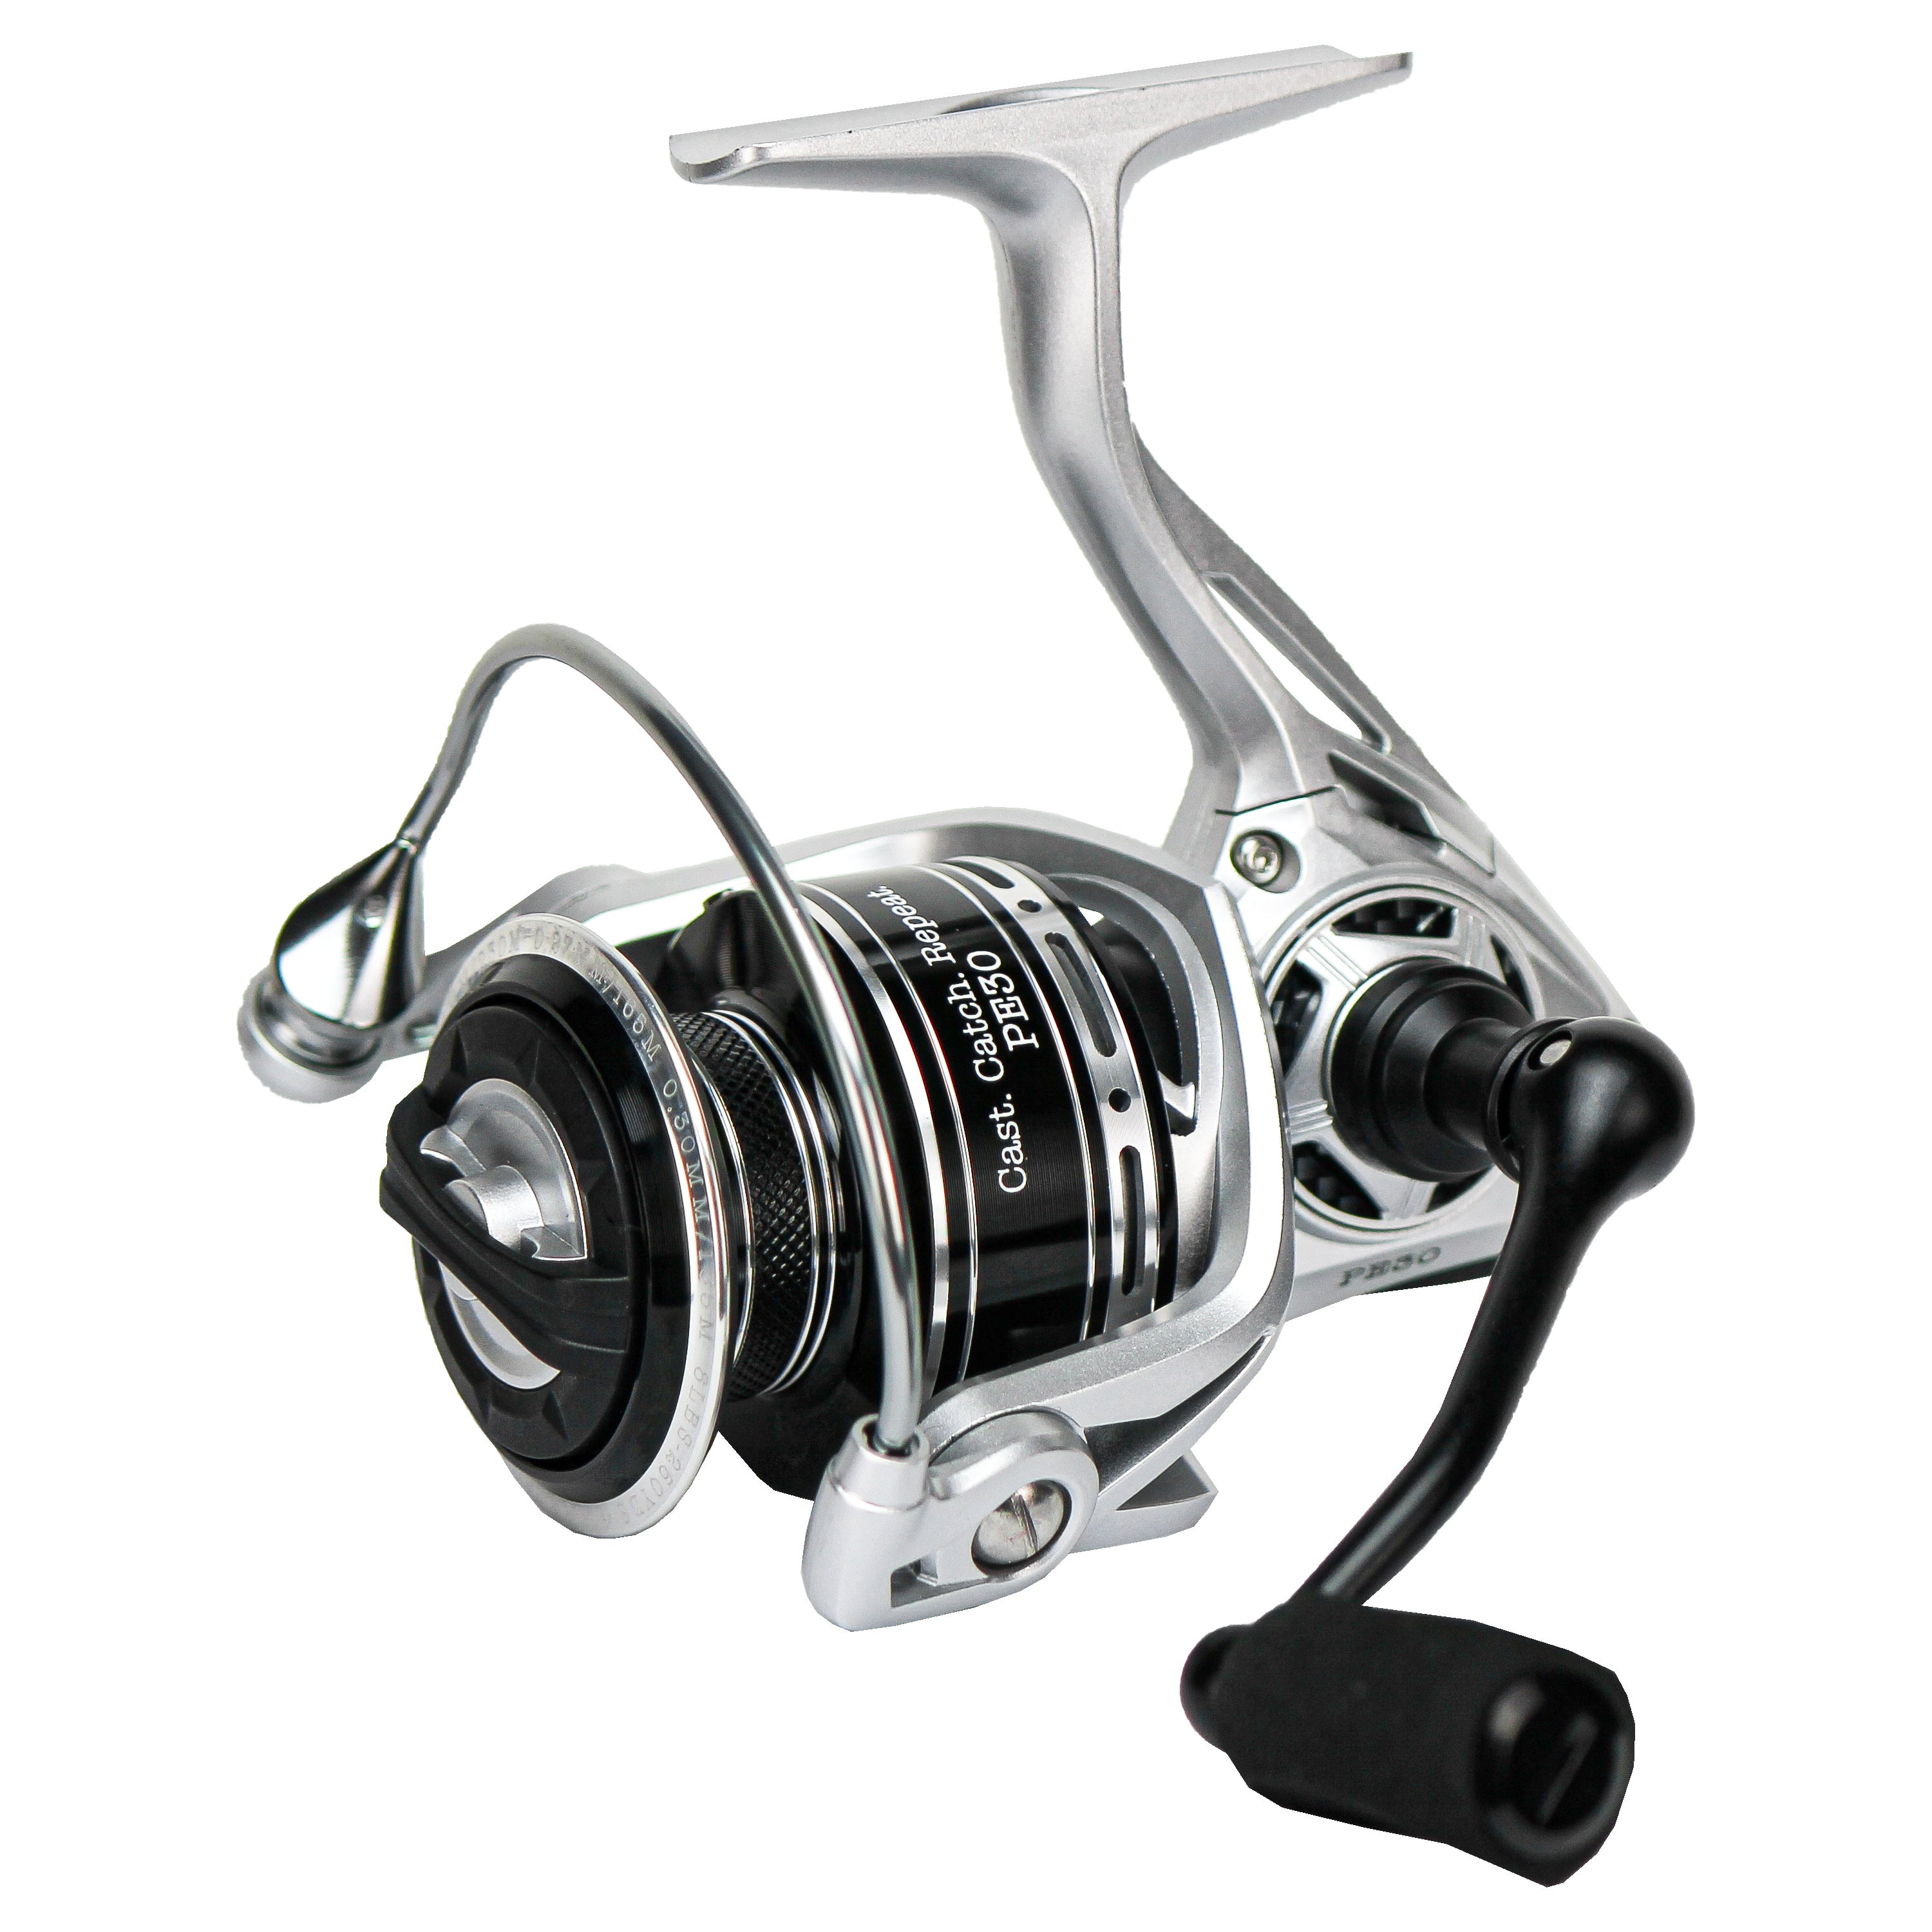 2022 New Wholesale Freshwater Spinning Reel 5.2:1 Carp Fishing For Bass  Fishing 3000-7000 Series - Buy Wholesale Spinning Reel,Fishing Reel For